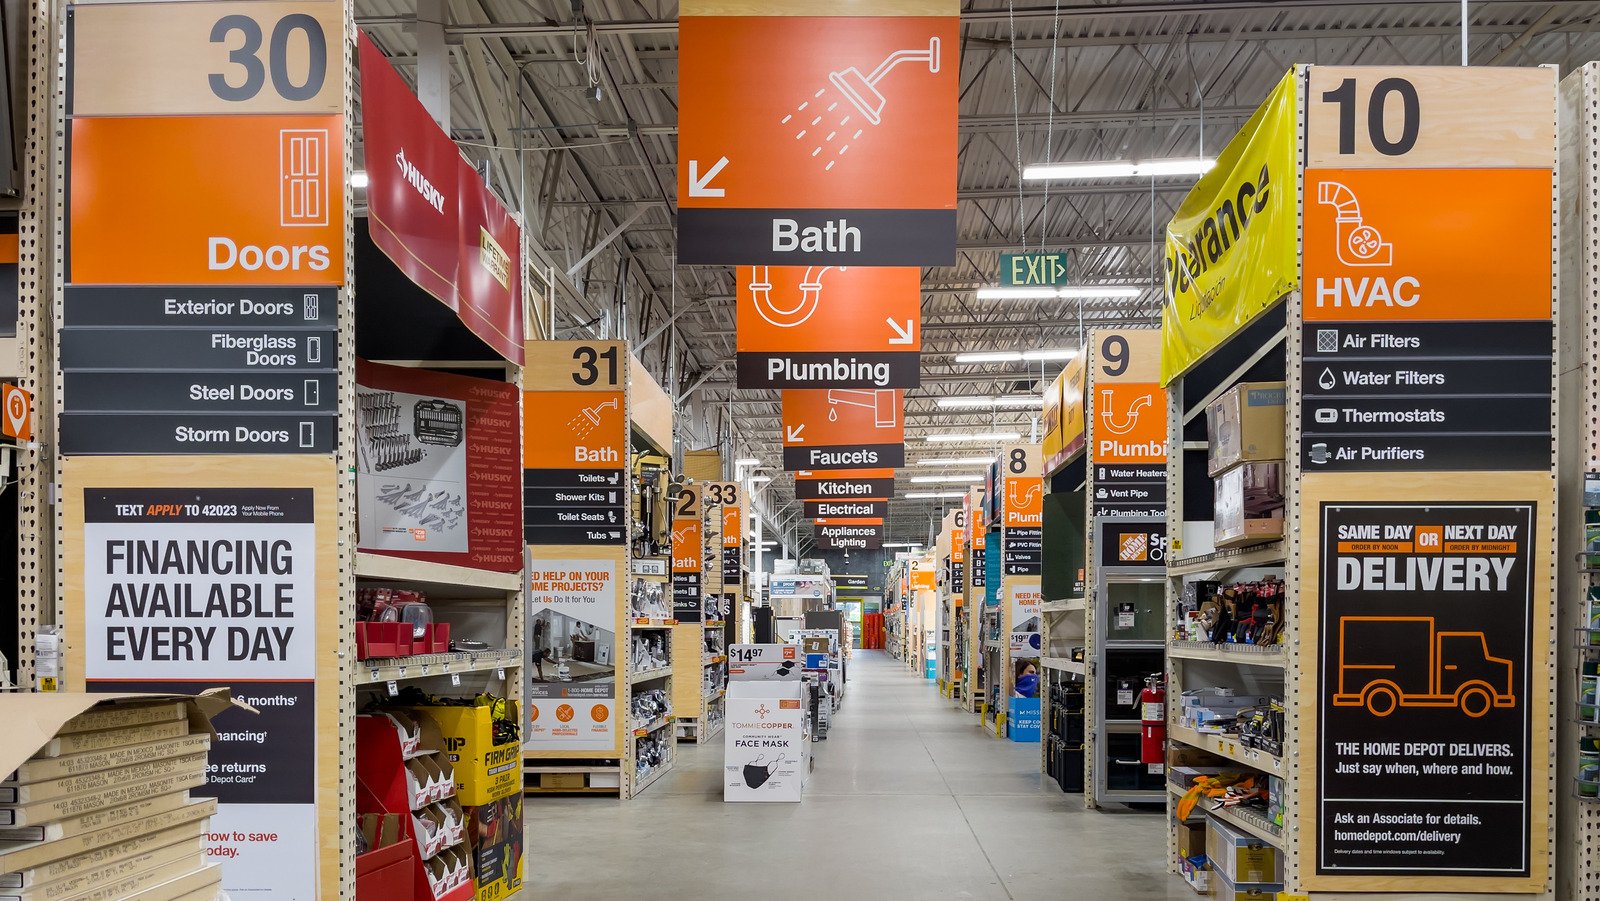 Why Checking Home Depot's Website Daily Can Help Fulfill Your Wish List